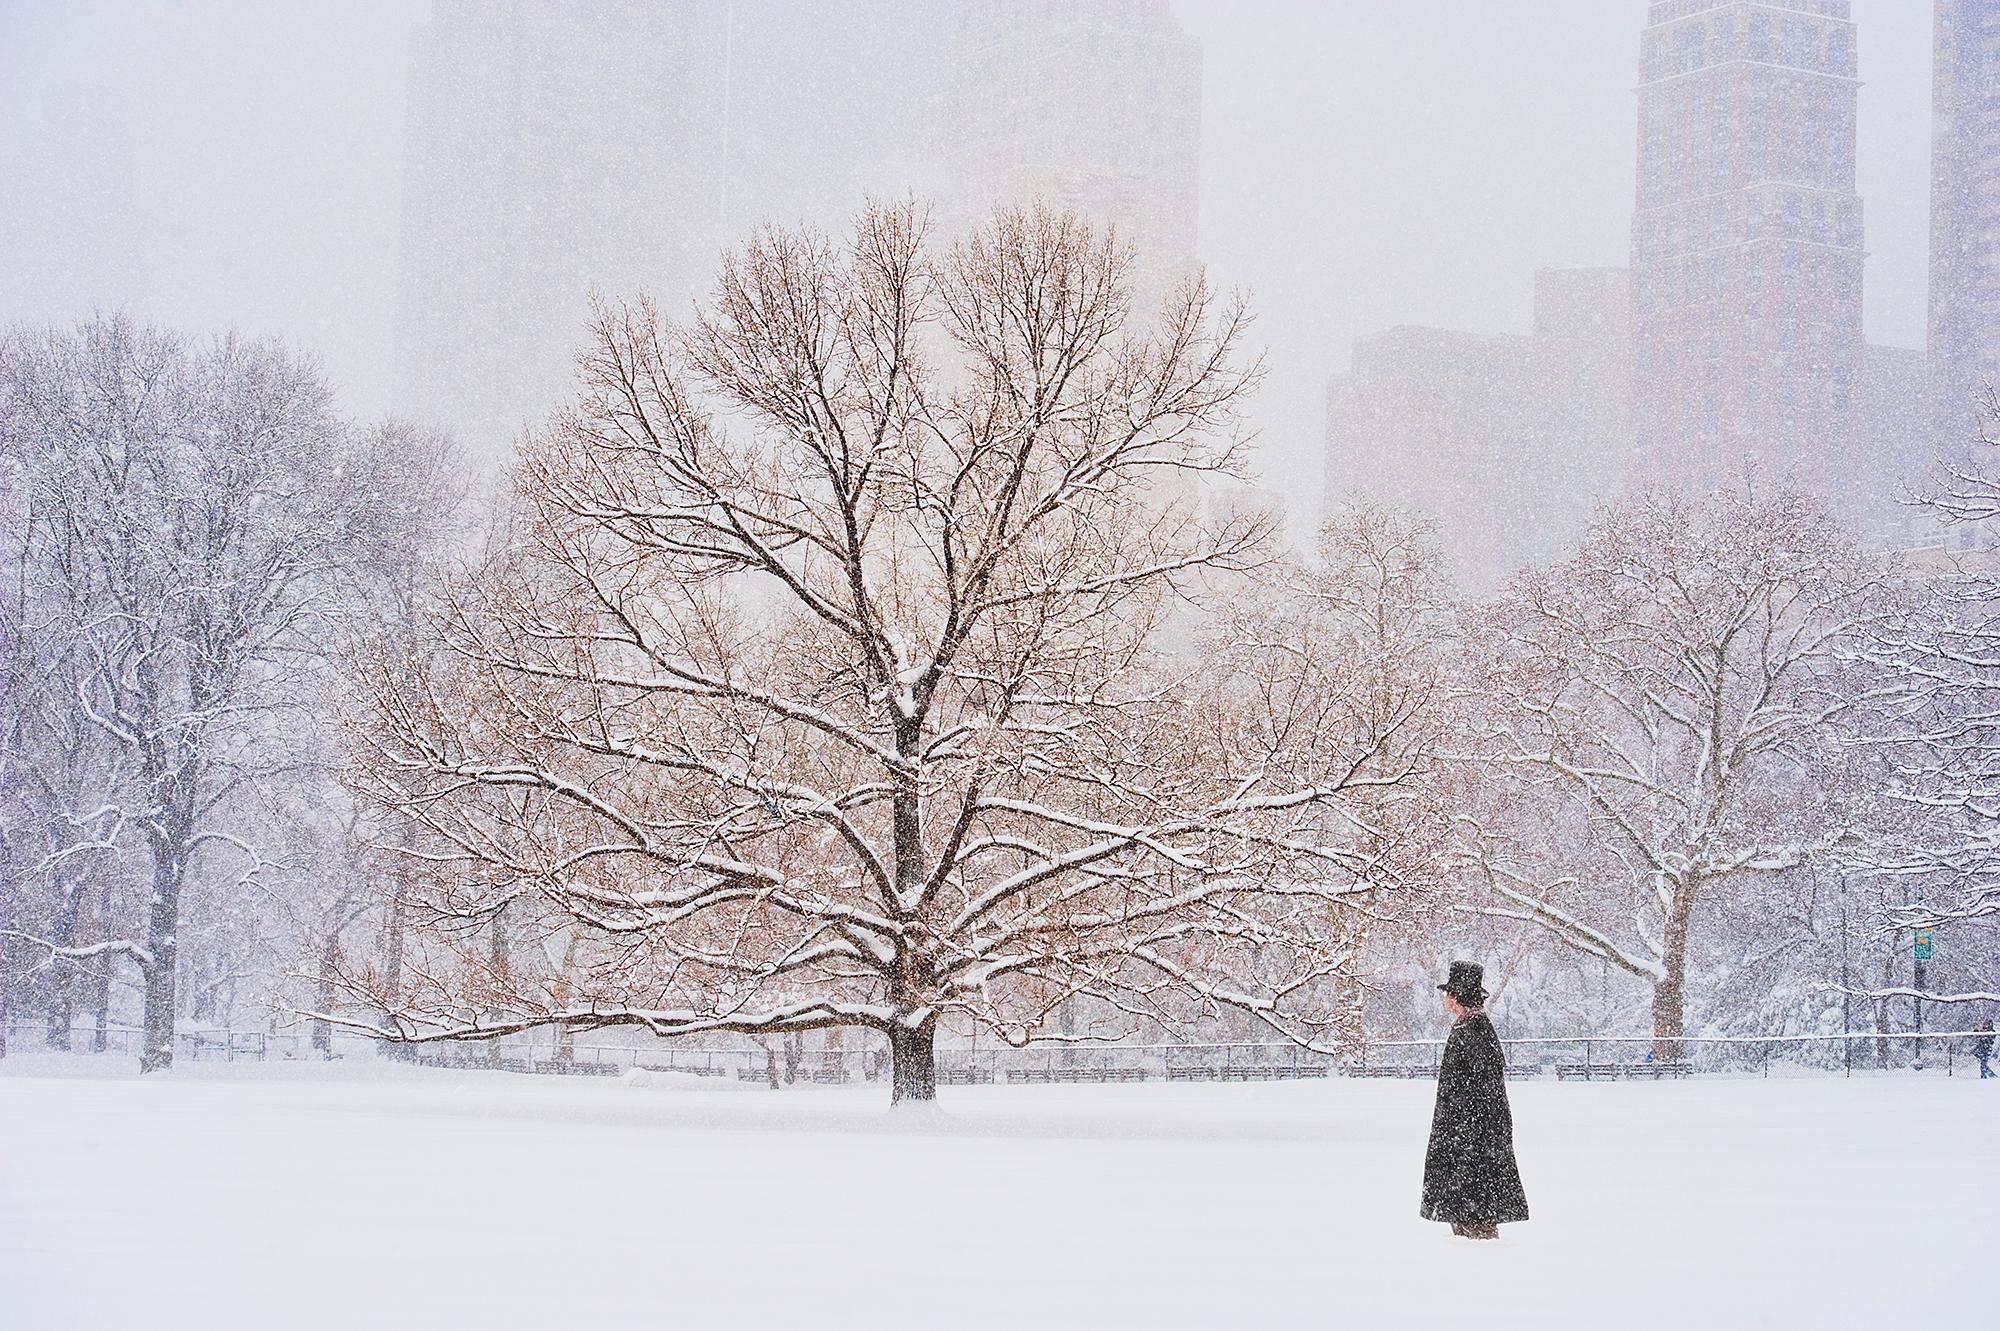 Man With Top Hat In Central Park During Snowstorm 